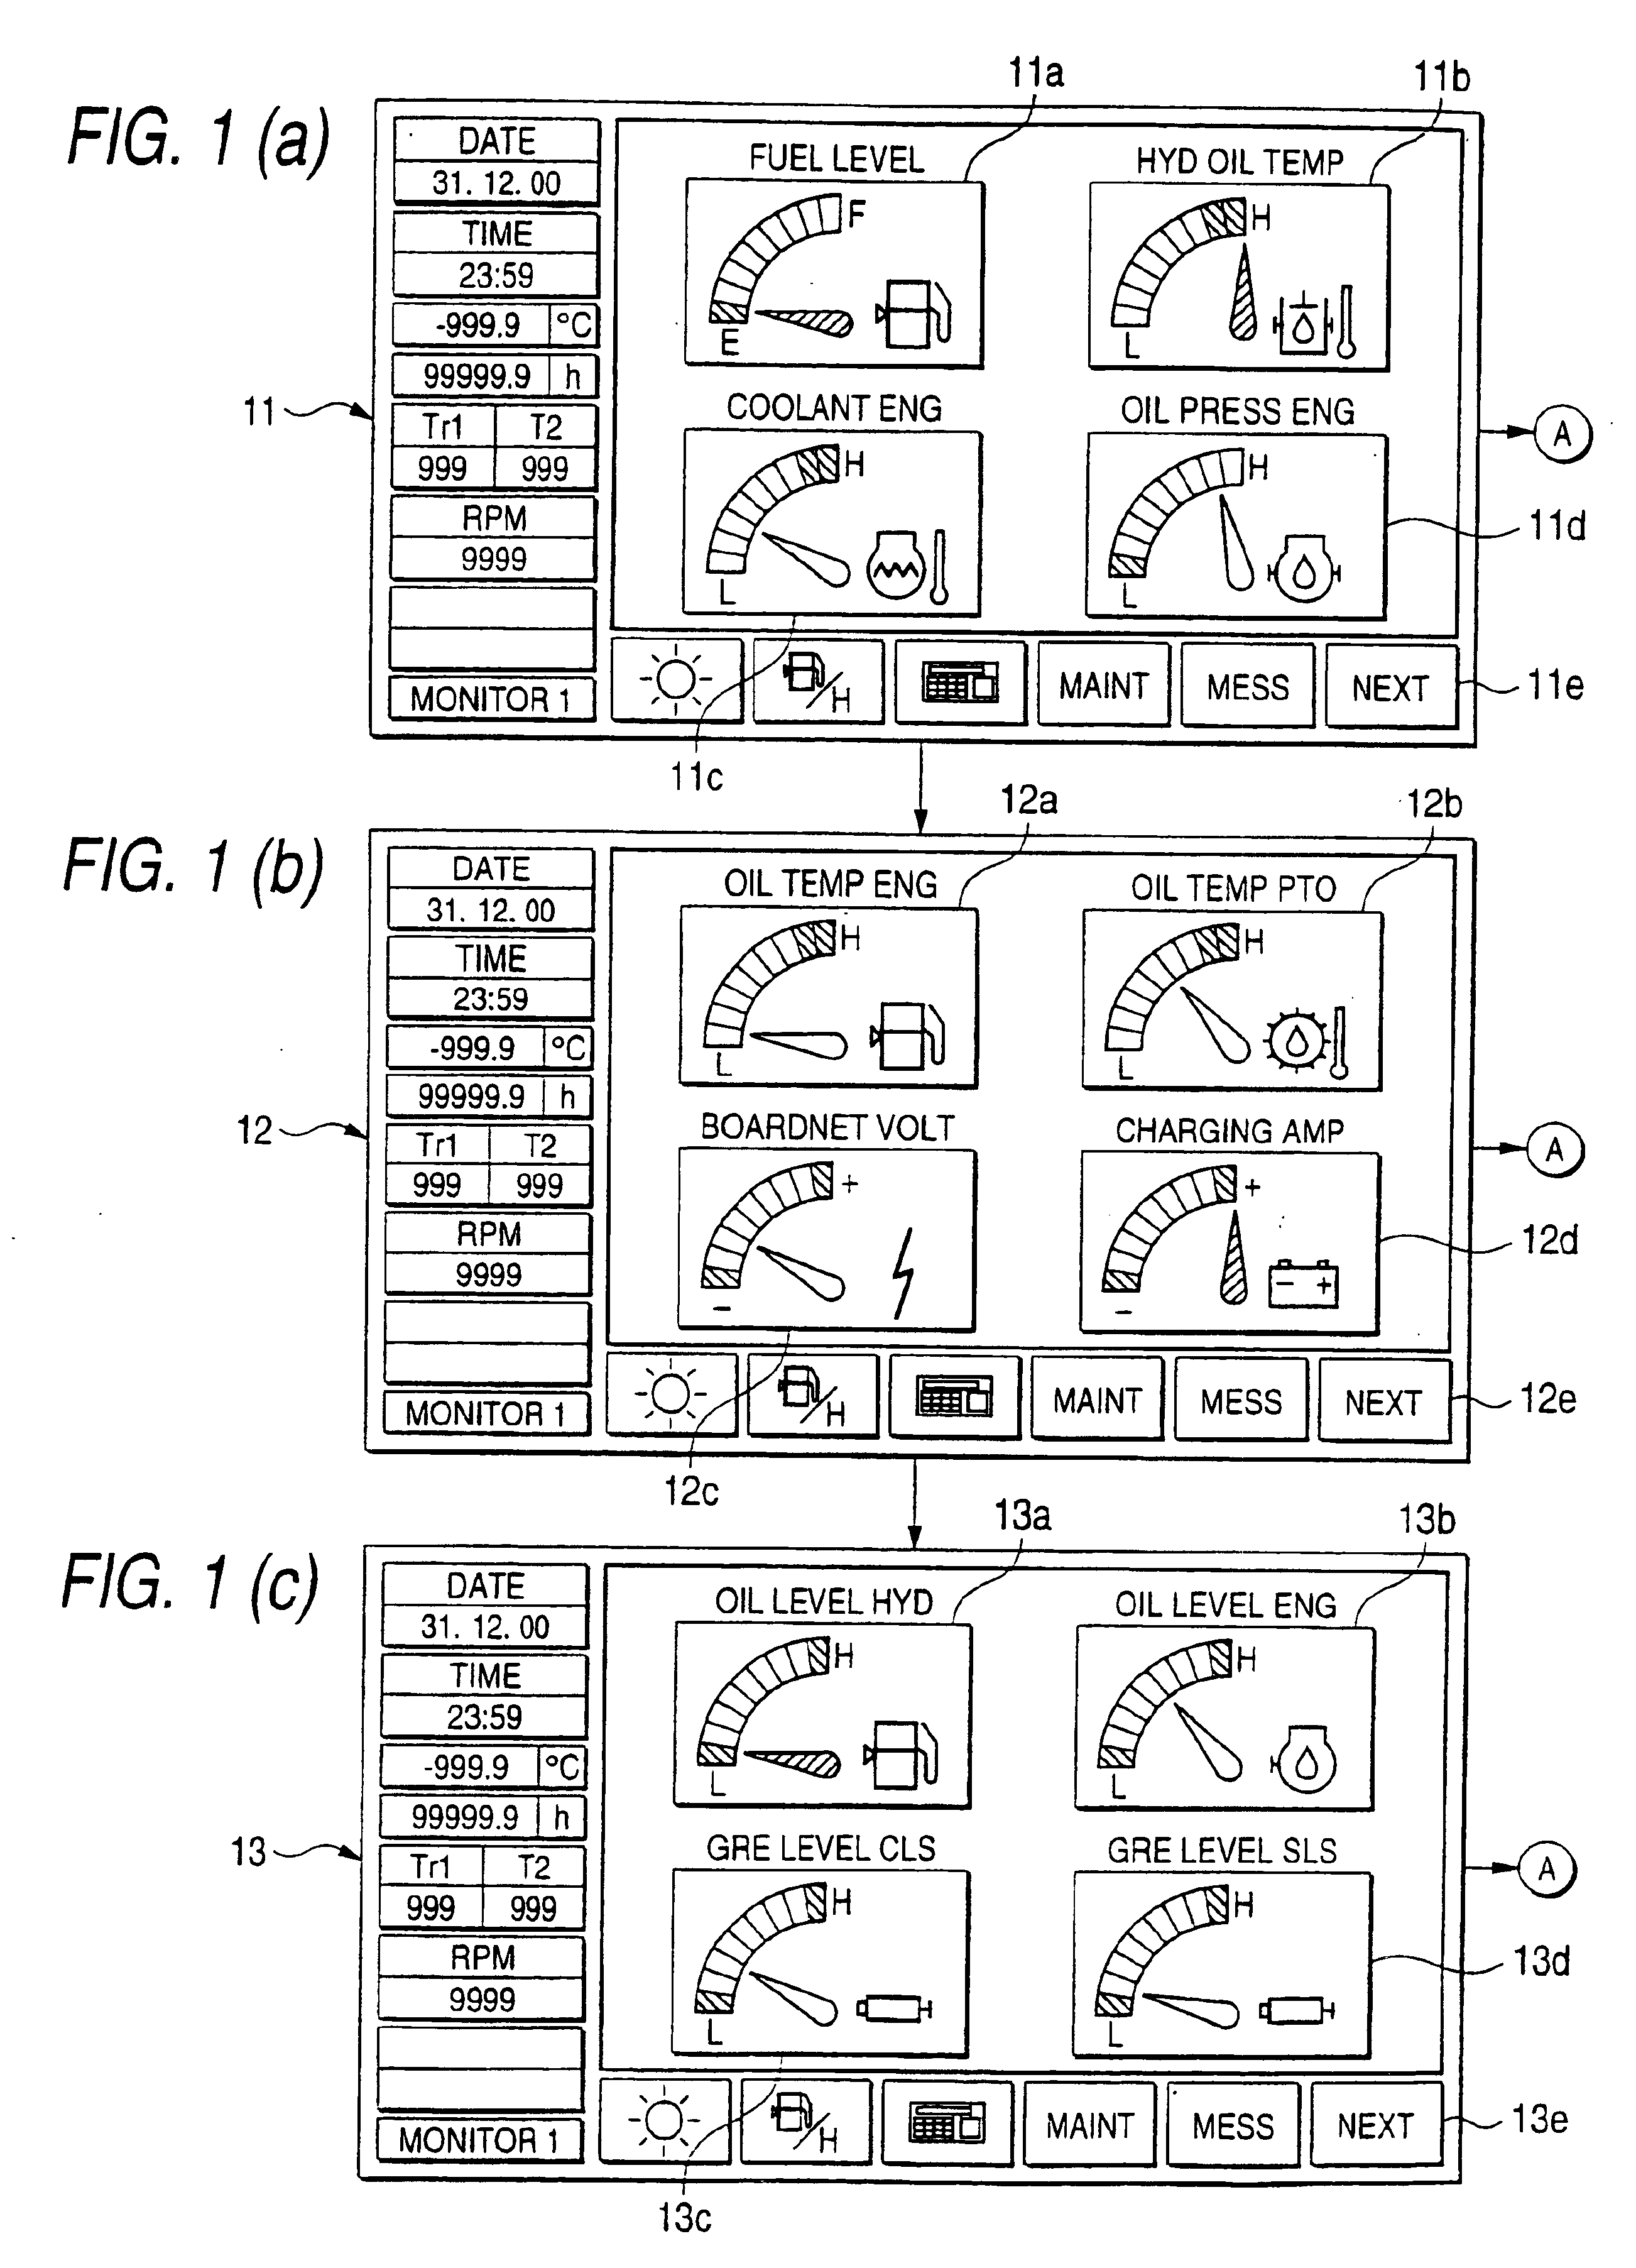 Display controller for display device of vehicle